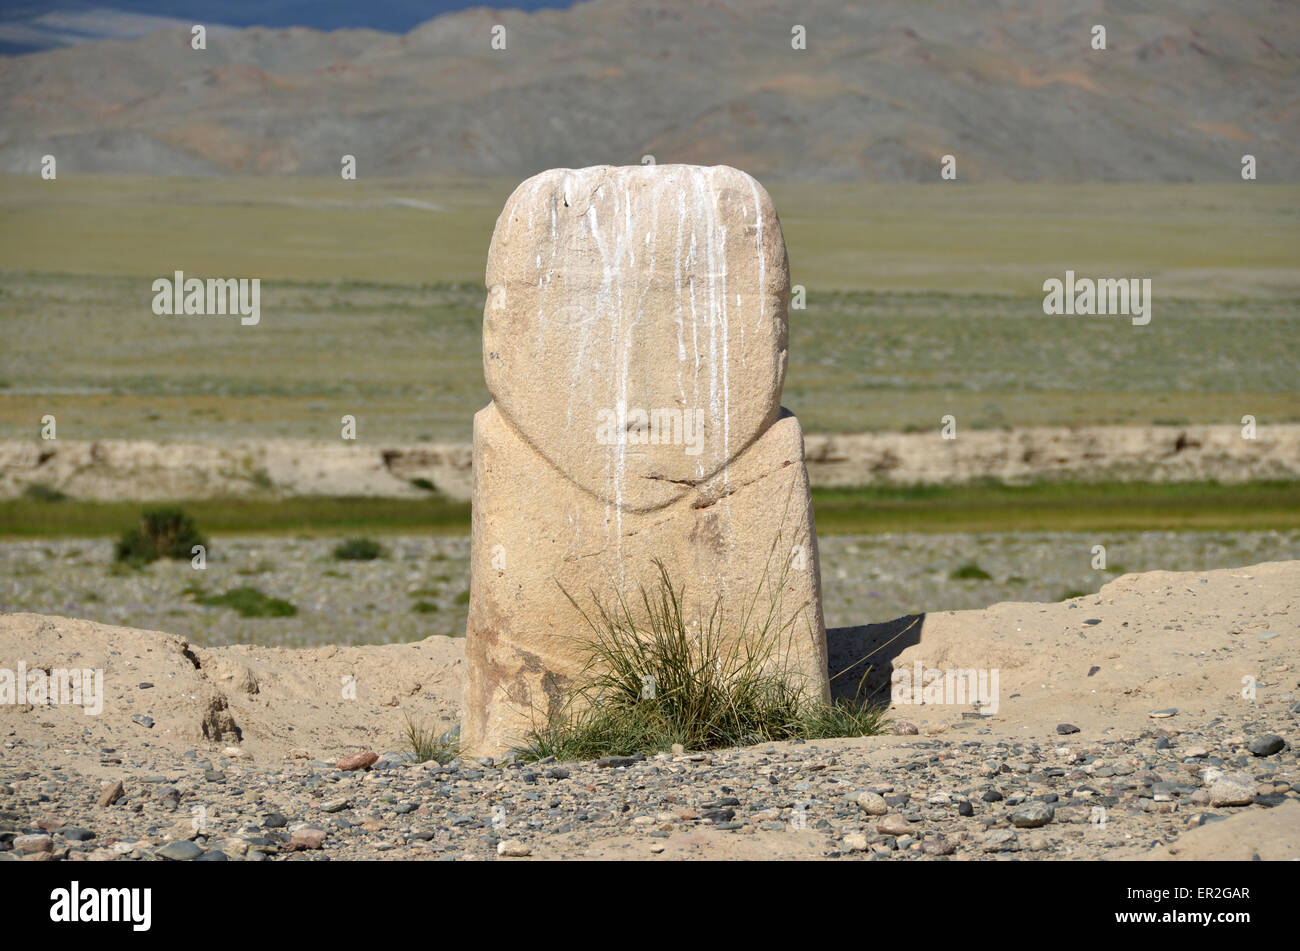 Balbal in western Mongolia, west of Olgii city, Bayan Olgii province. Balbals are antic standing stones. Stock Photo